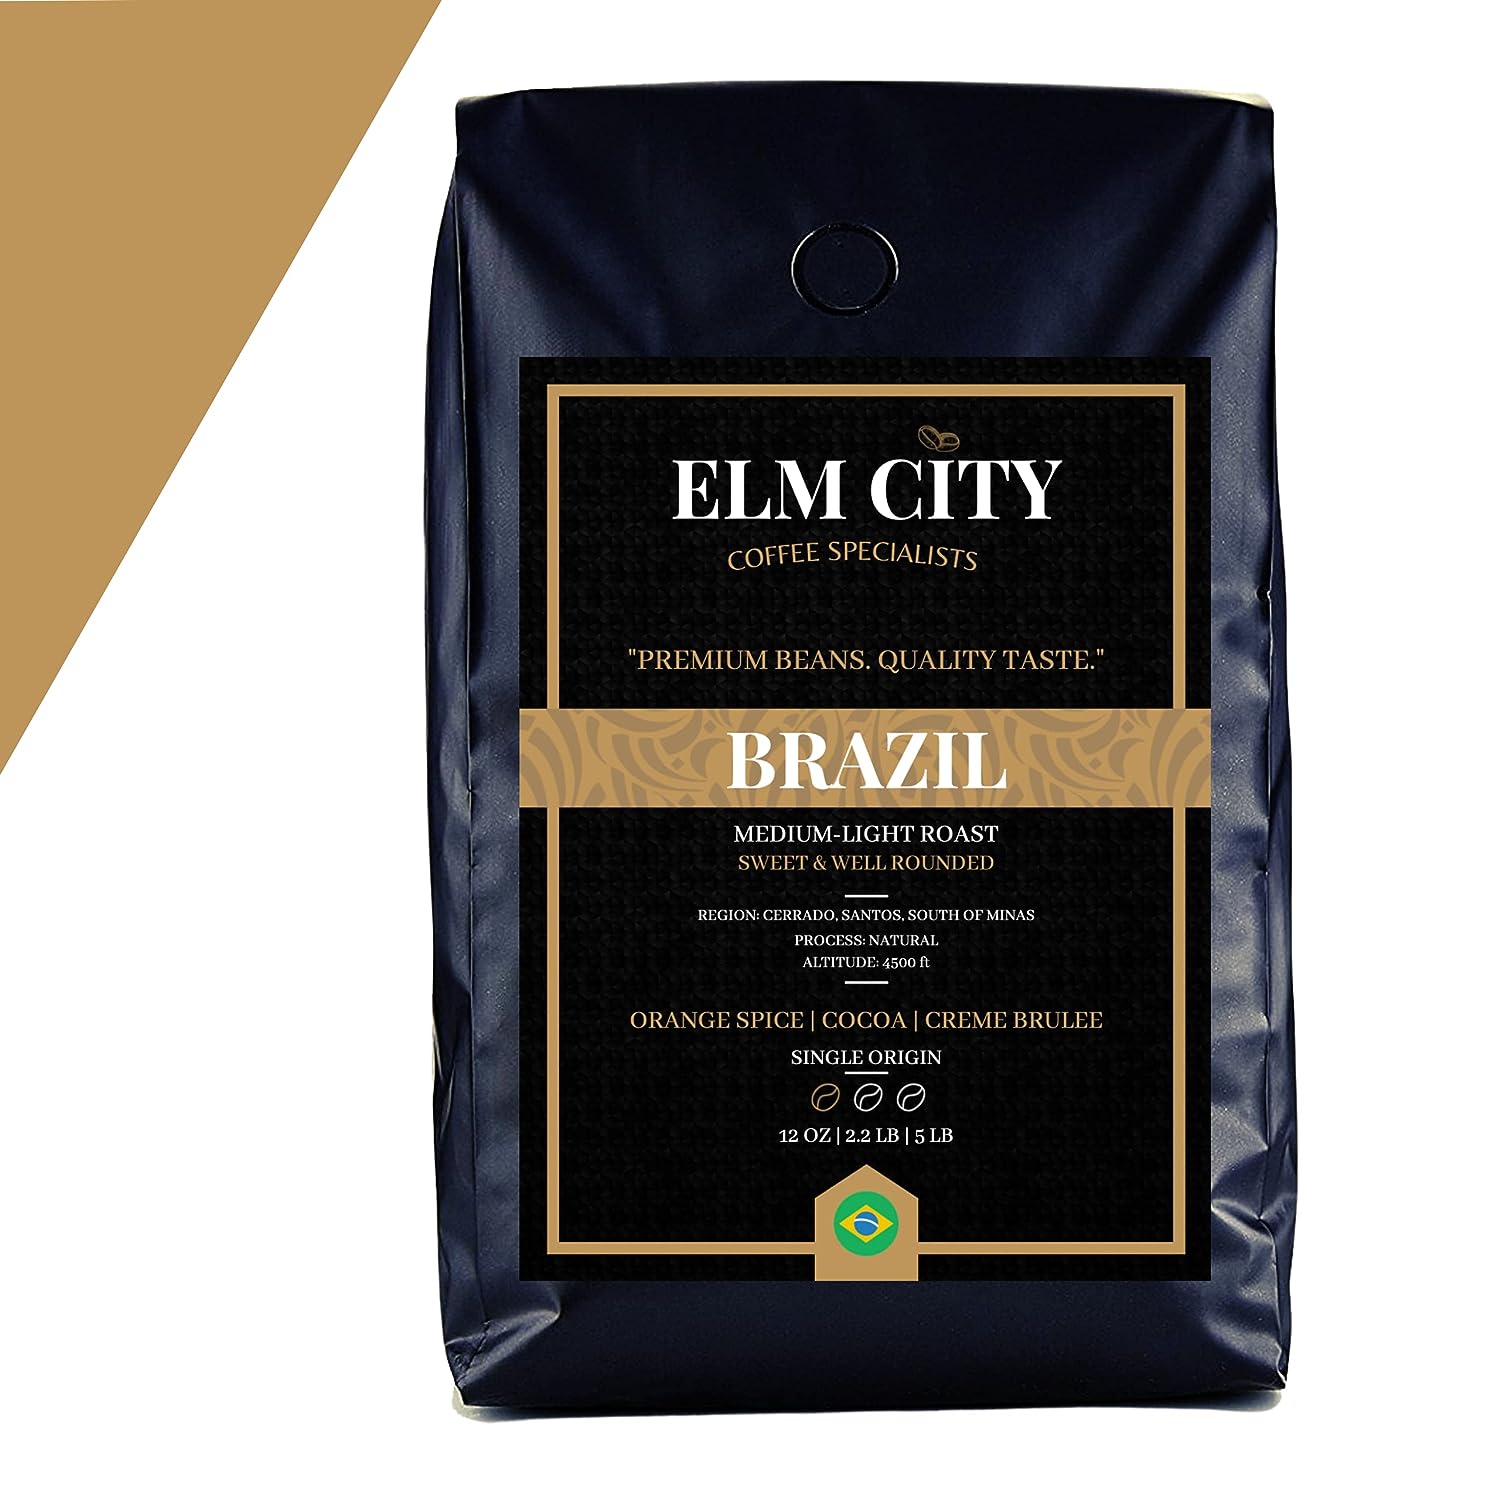 Elm City Coffee Specialists - Single Origin Ground Specialty Coffee | BRAZIL | Medium-Light Roast, Notes of Orange Spice, Rich Cocoa and Creme Brûlée, Low Acid, Round and Sweet